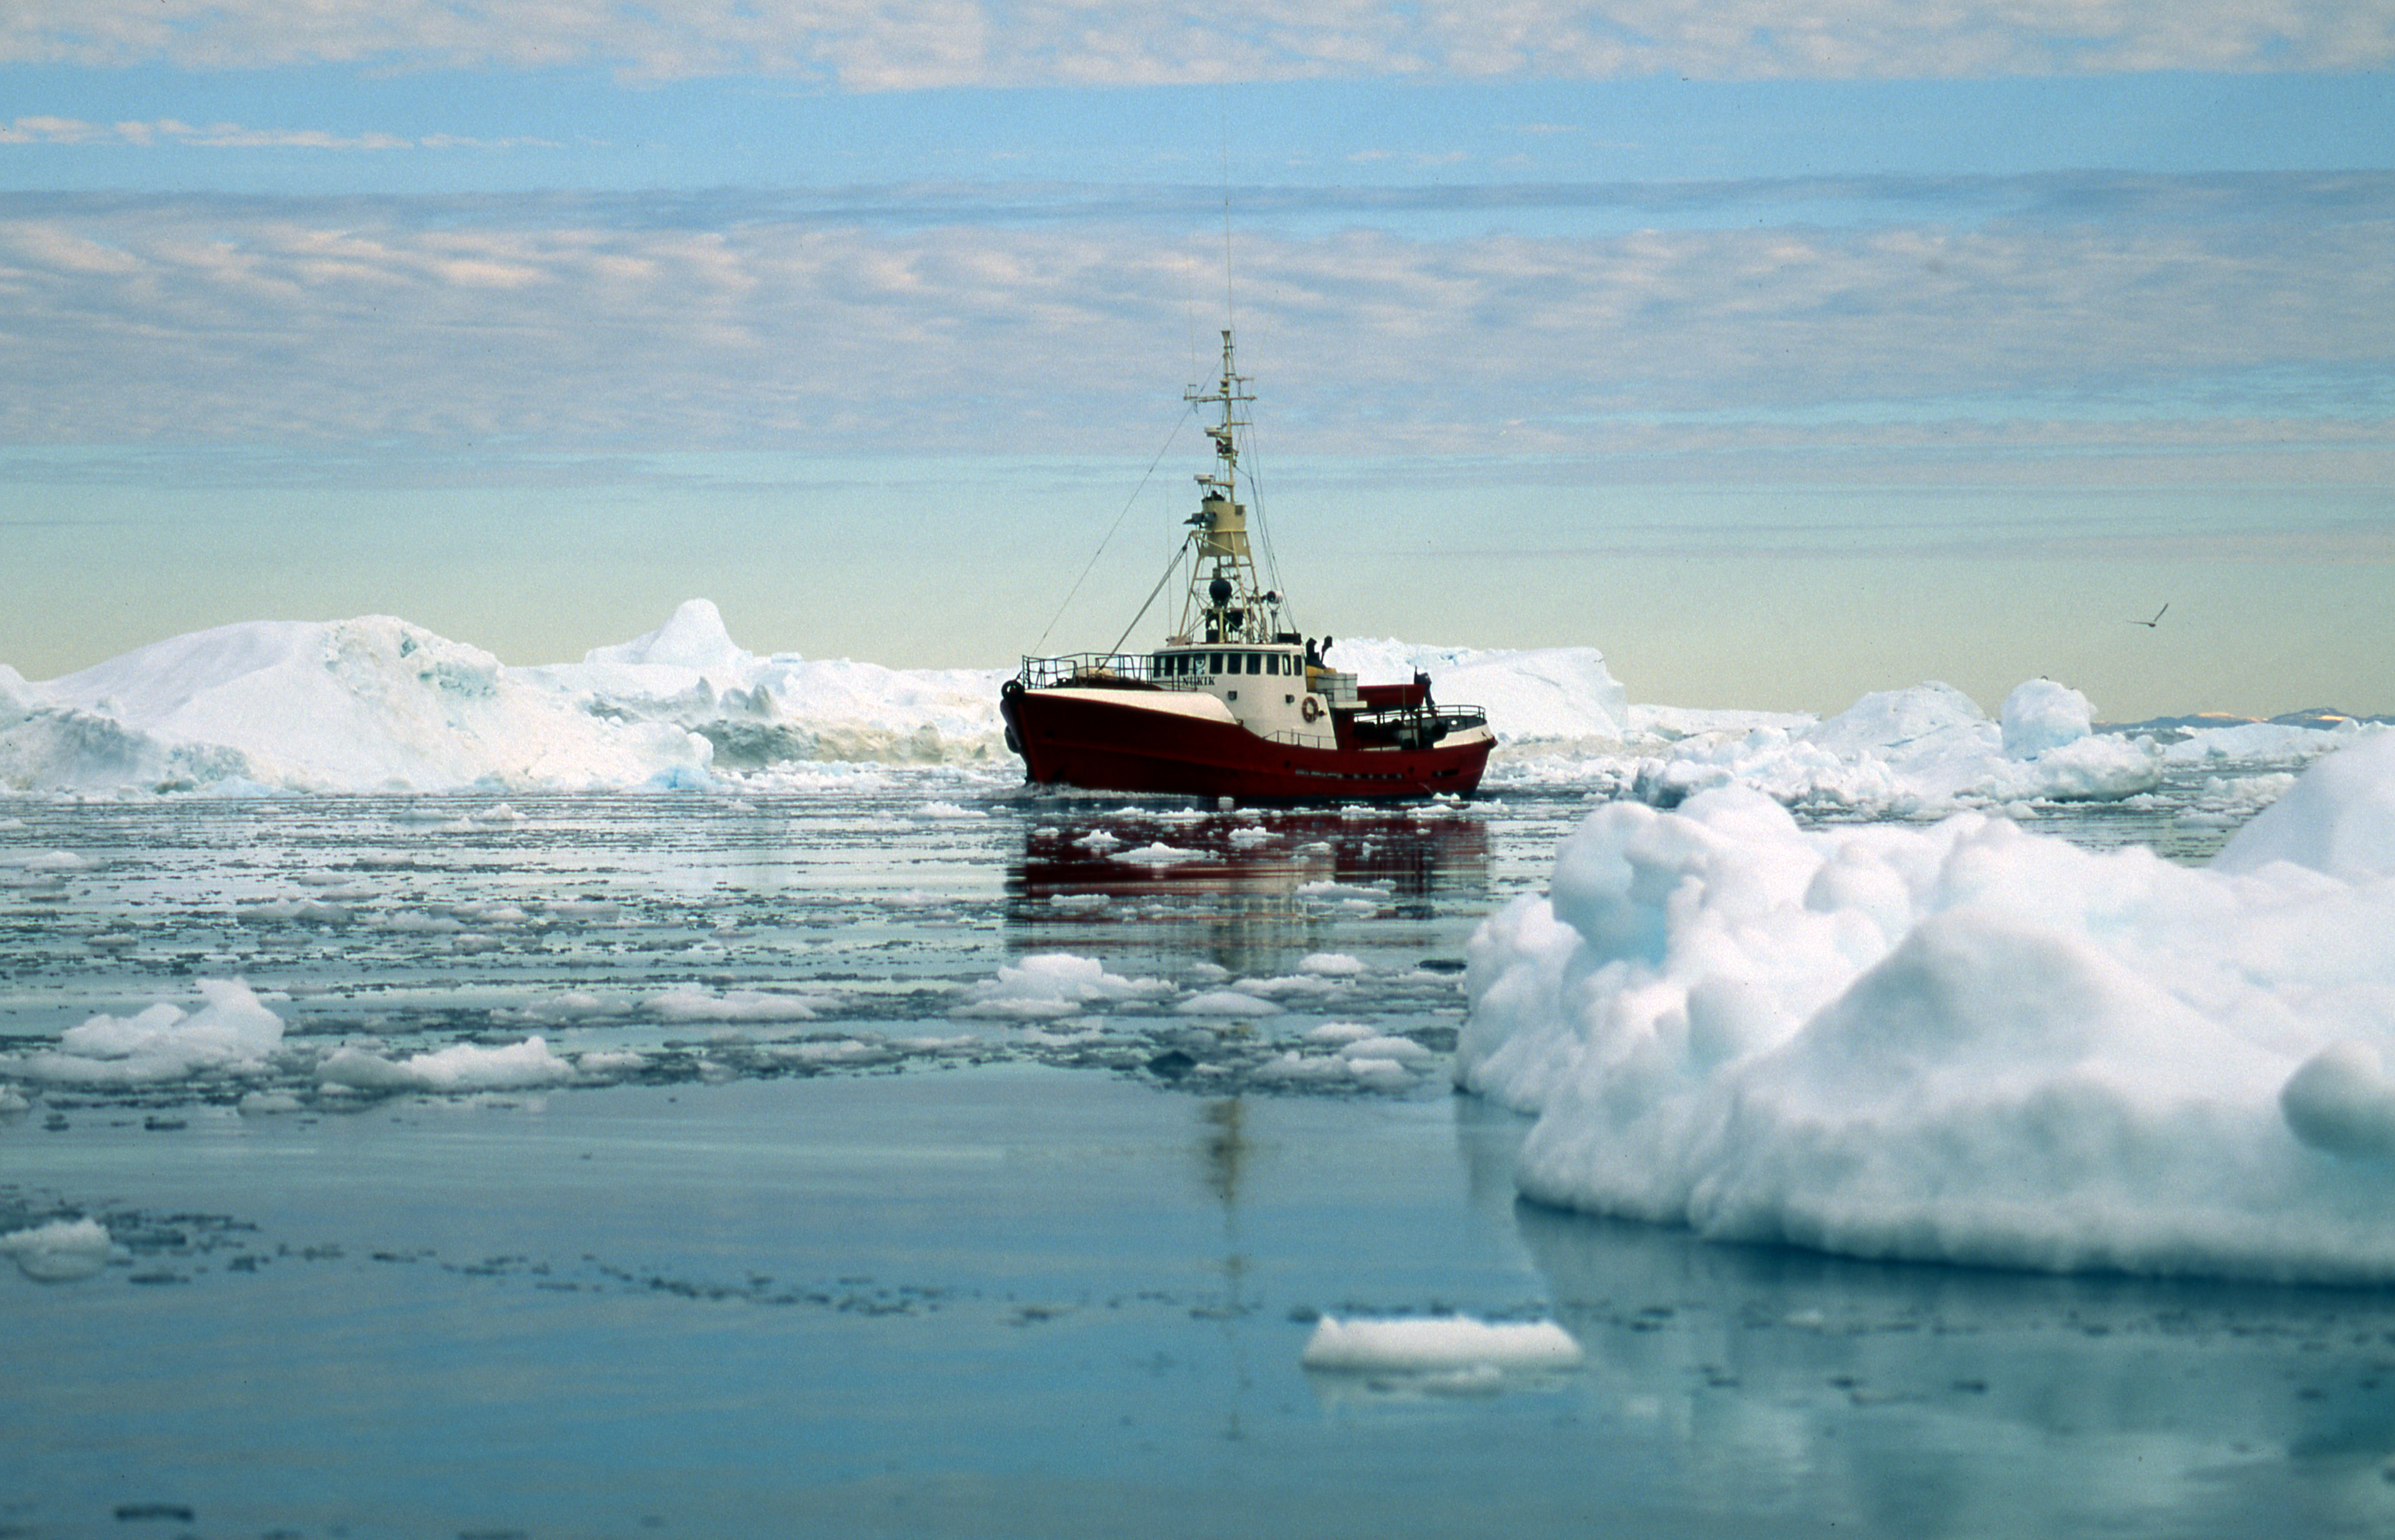 Fishing boat in between icebergs, Disco Bay, Greenland | GRID-Arendal